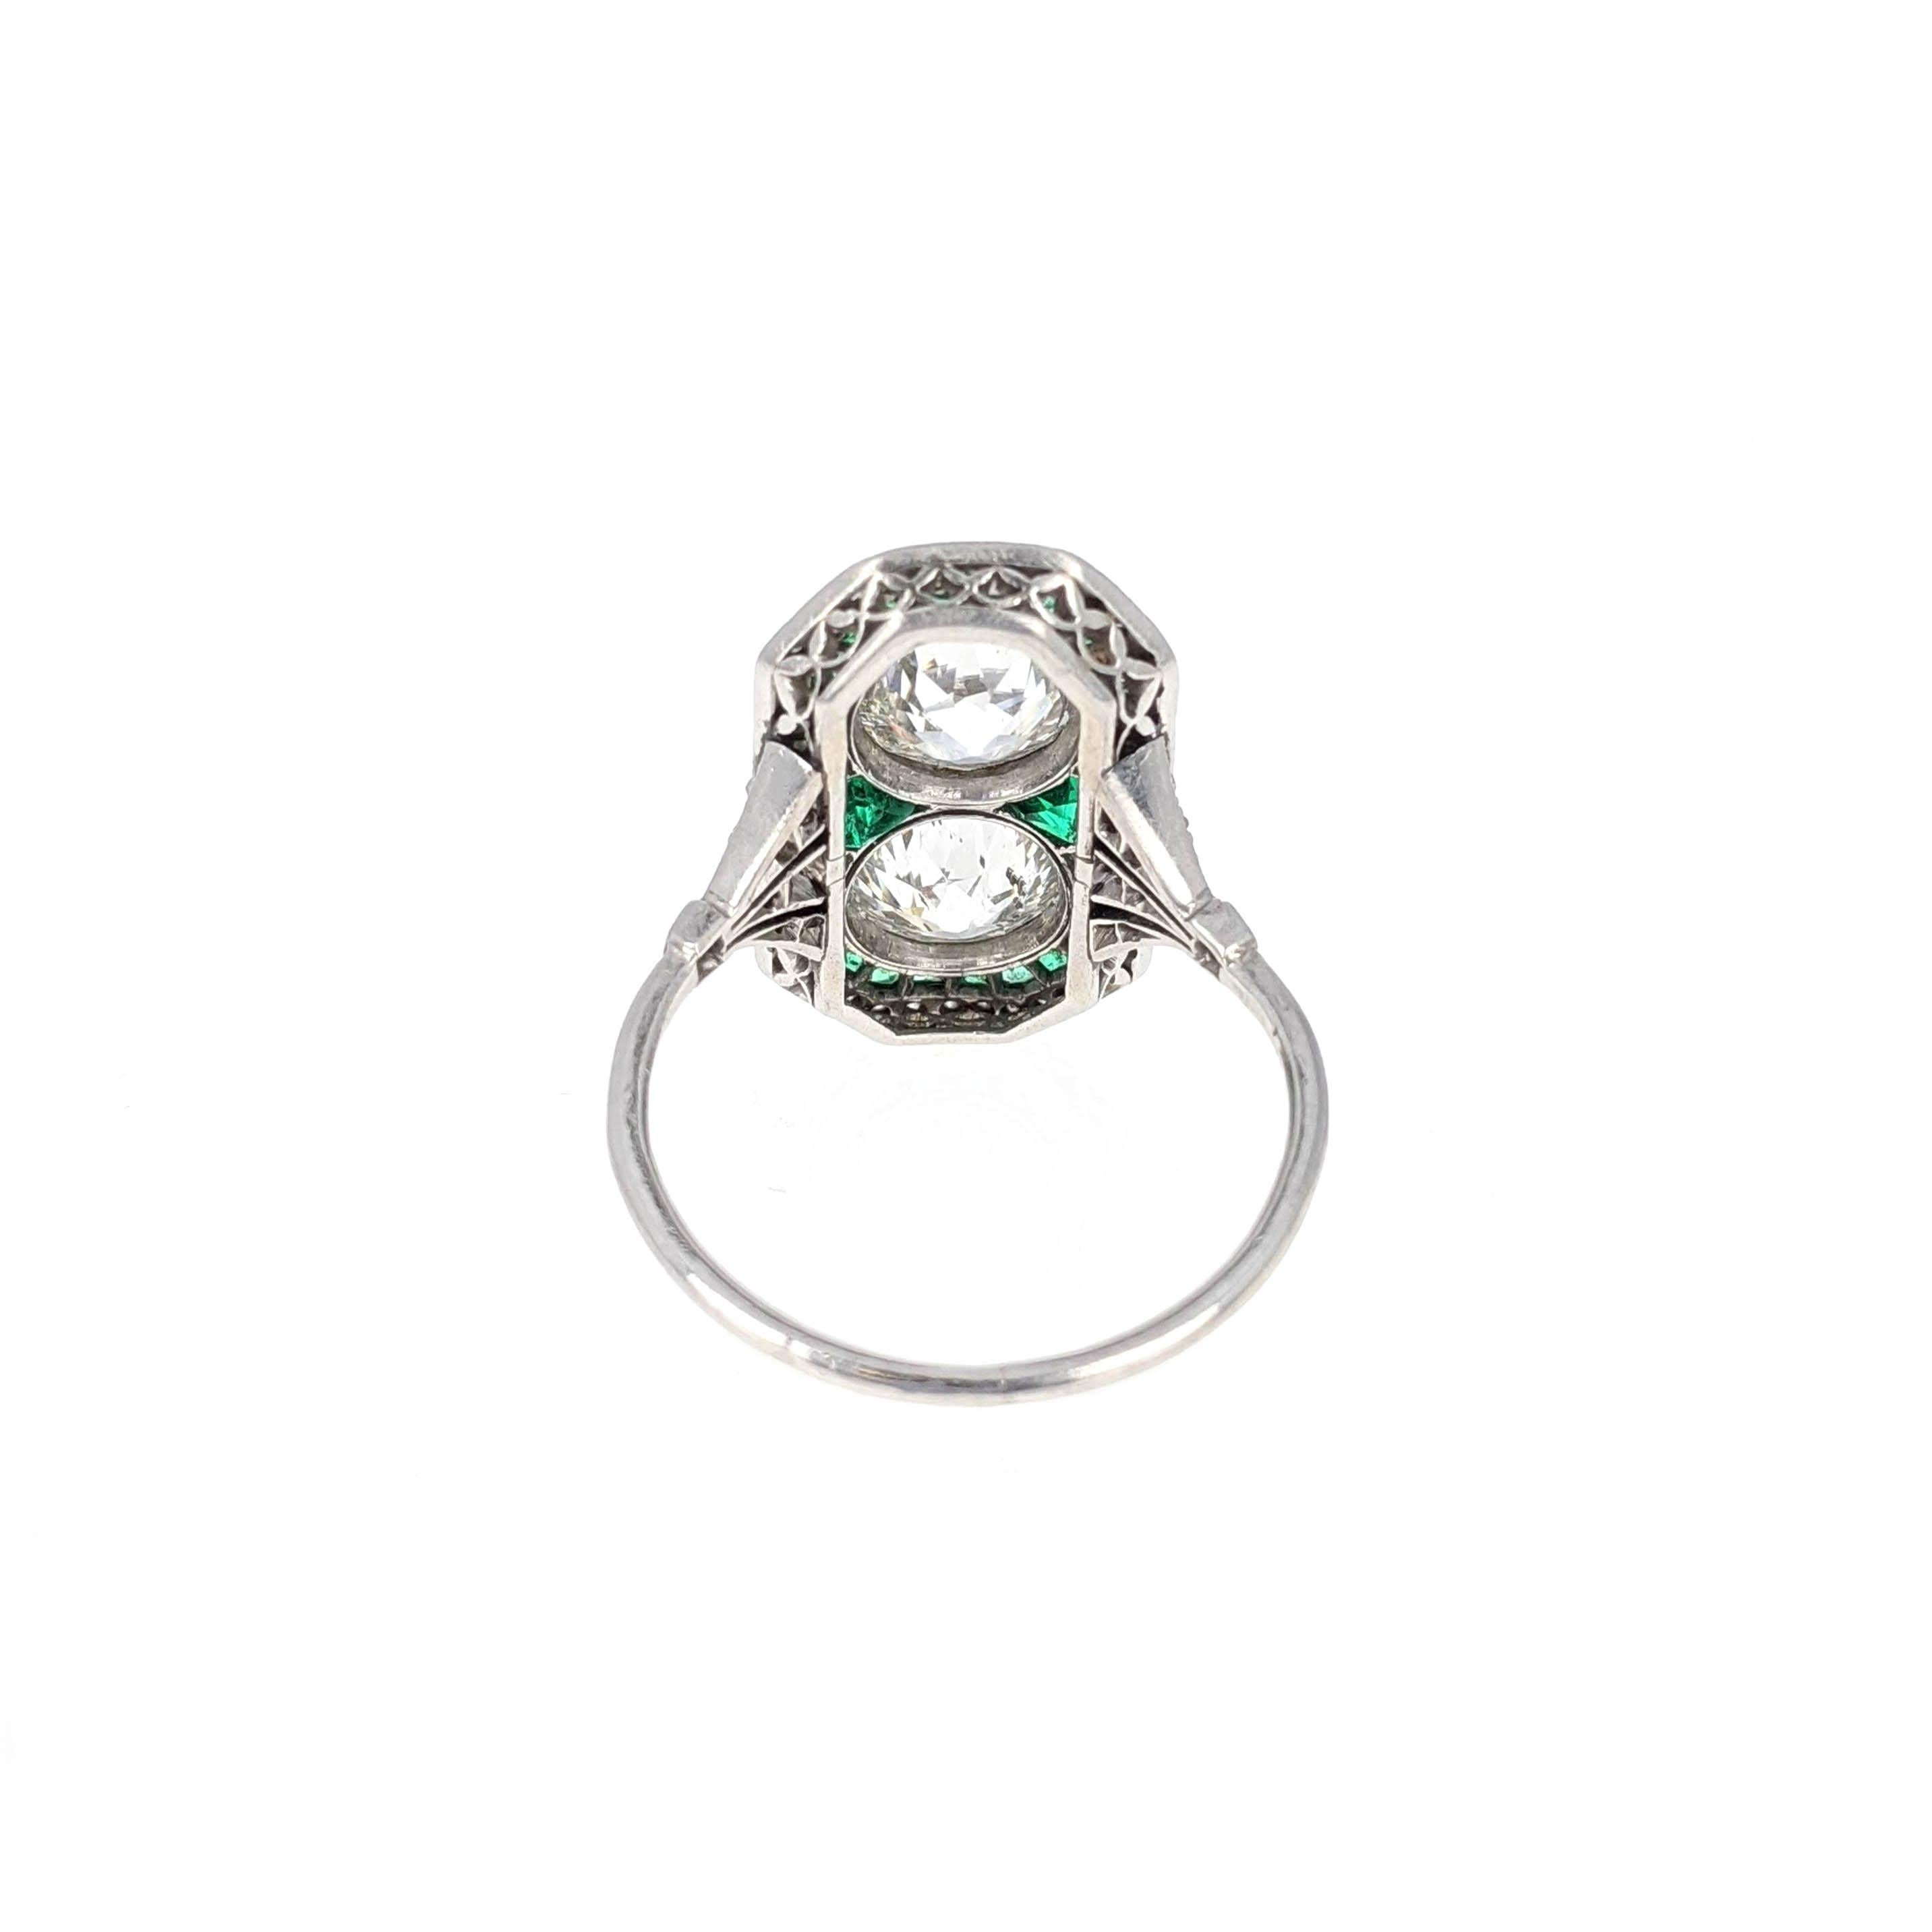 Belle Époque Old European Cut Diamond Emerald and Platinum French Ring 1